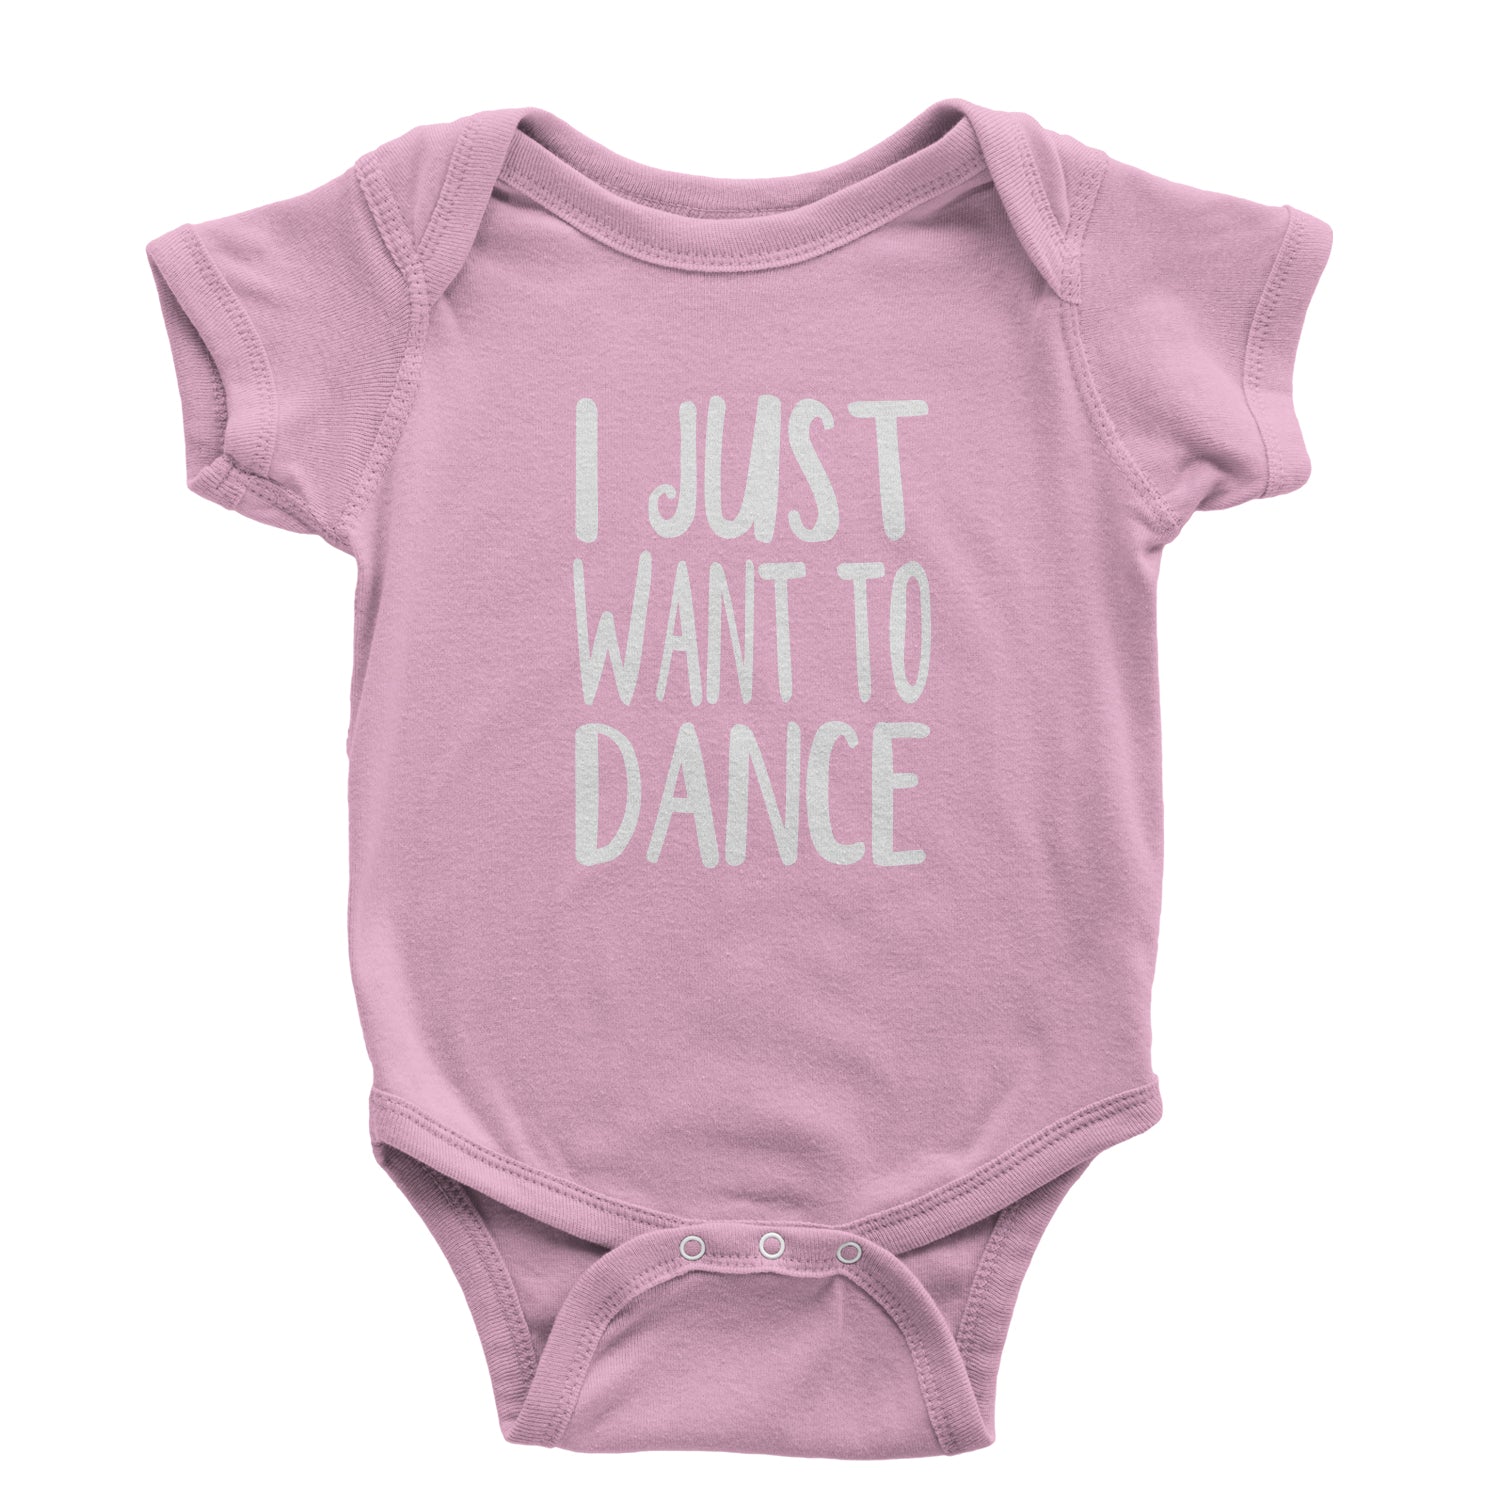 I Just Want To Dance Infant One-Piece Romper Bodysuit boomerang, dancing, jo, jojo by Expression Tees